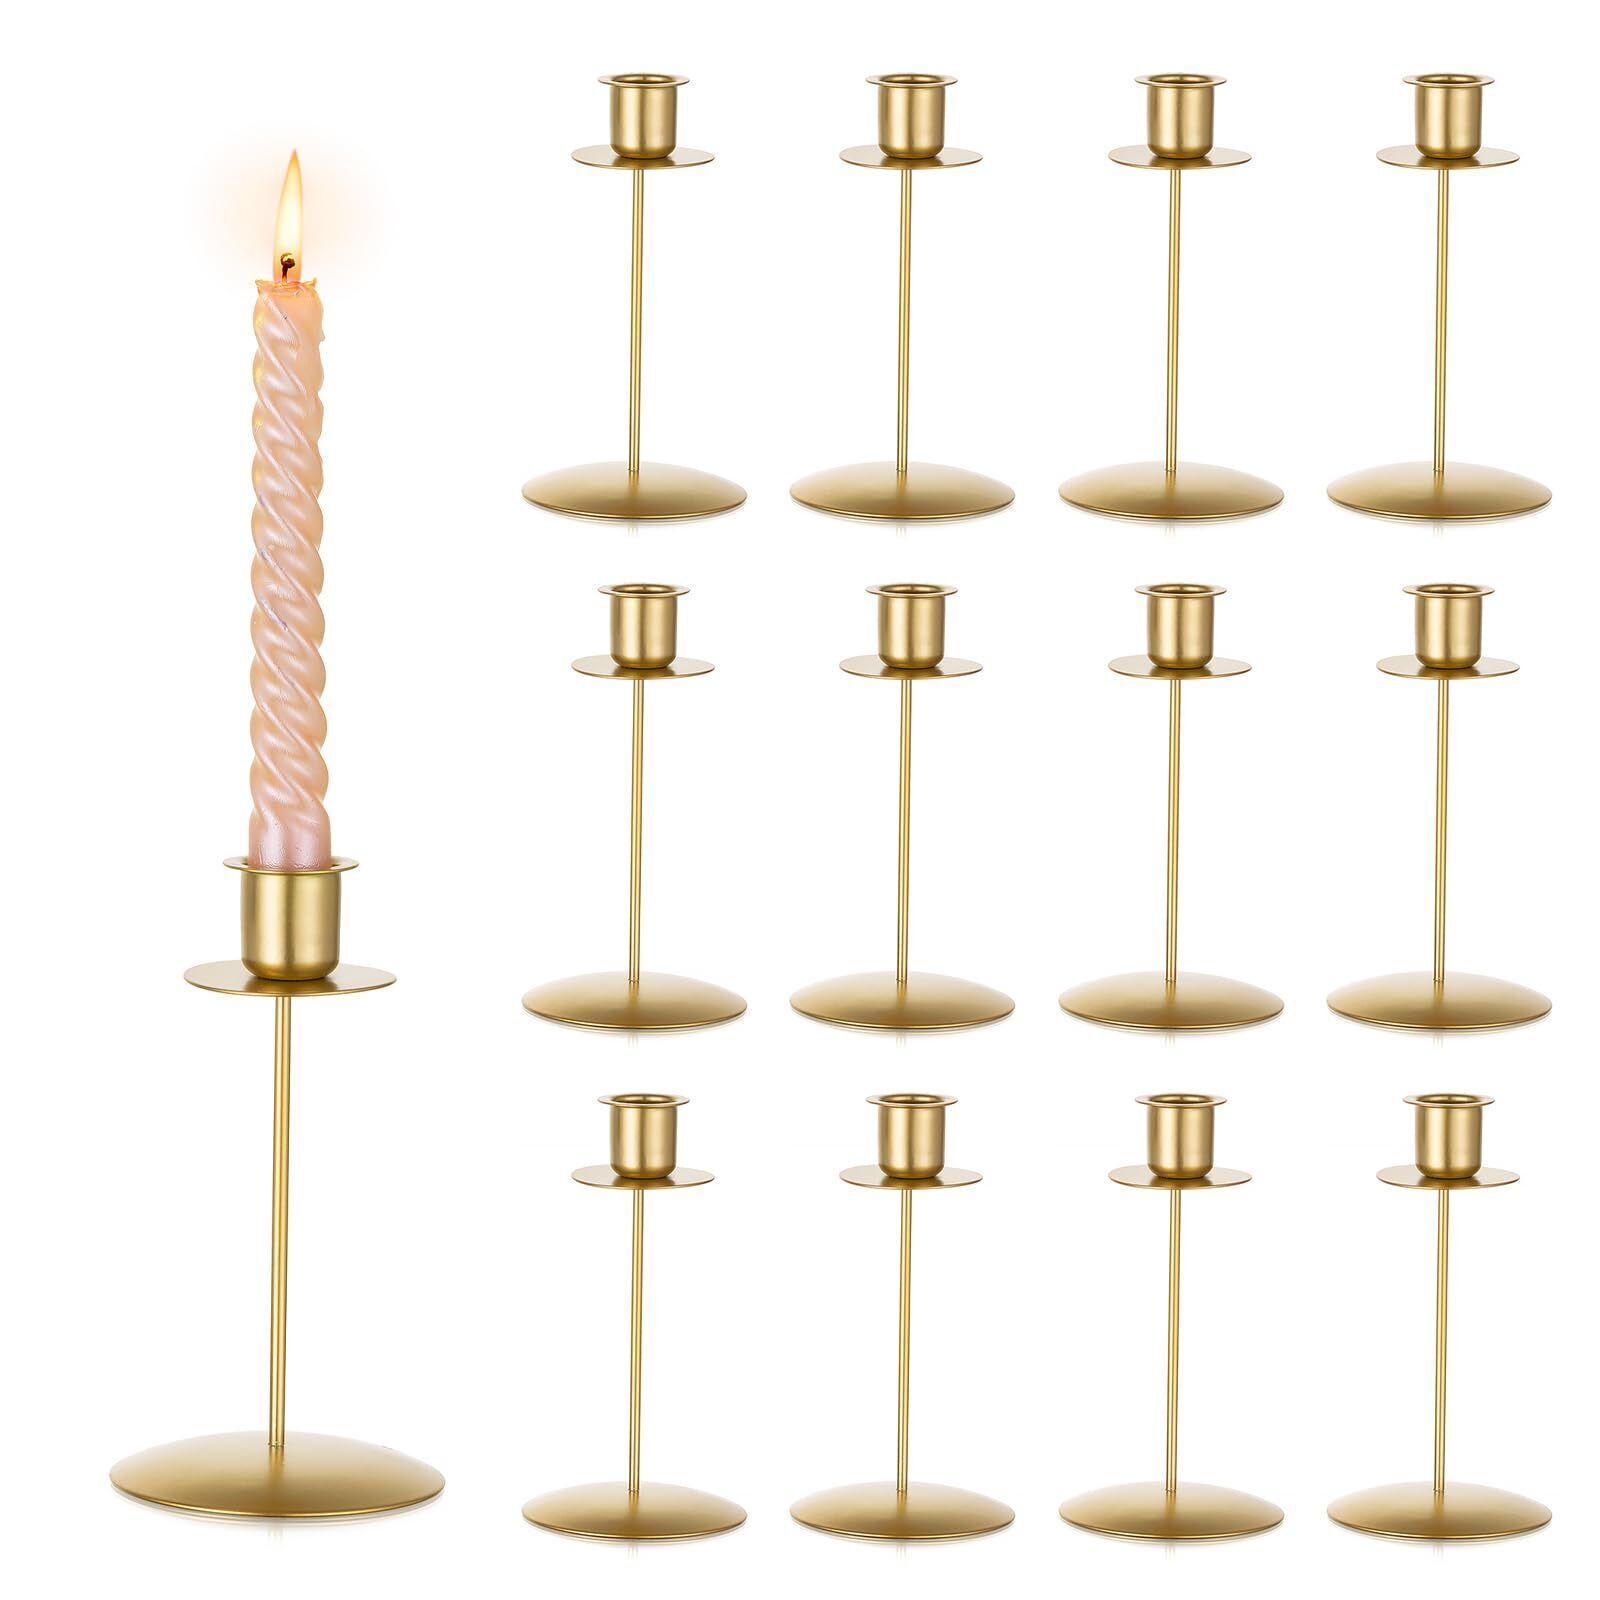 Sziqiqi Gold Metal Candle Holder - Pack of 12 Candlestick Holders for Wedding...